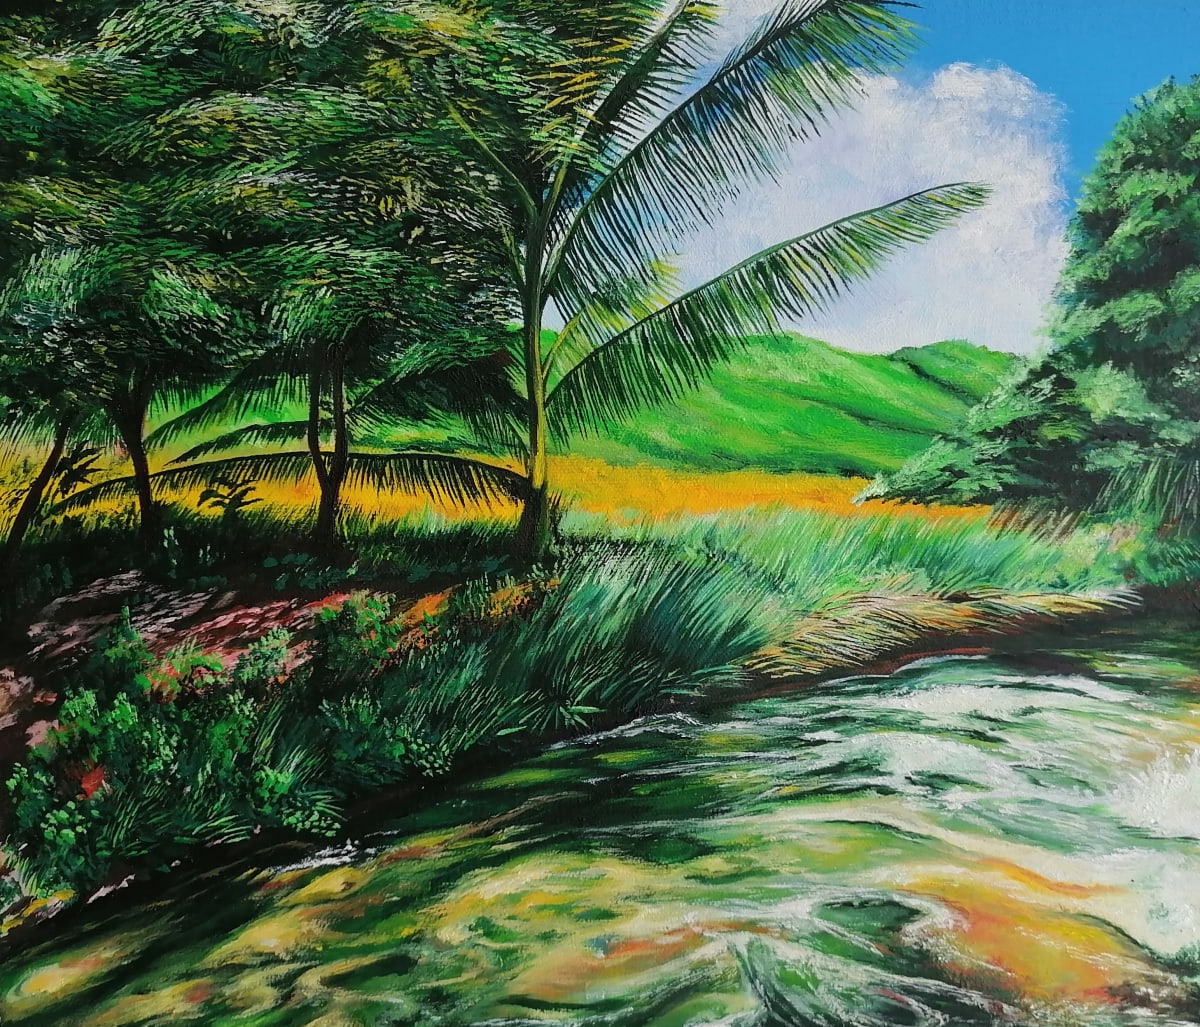 Landscape on yellow background by Victor Zapata  Image: This is a painting of the Santa Maria Nutio River. Yellow fields and crystal clear water make a unique scene of beauty and calm.